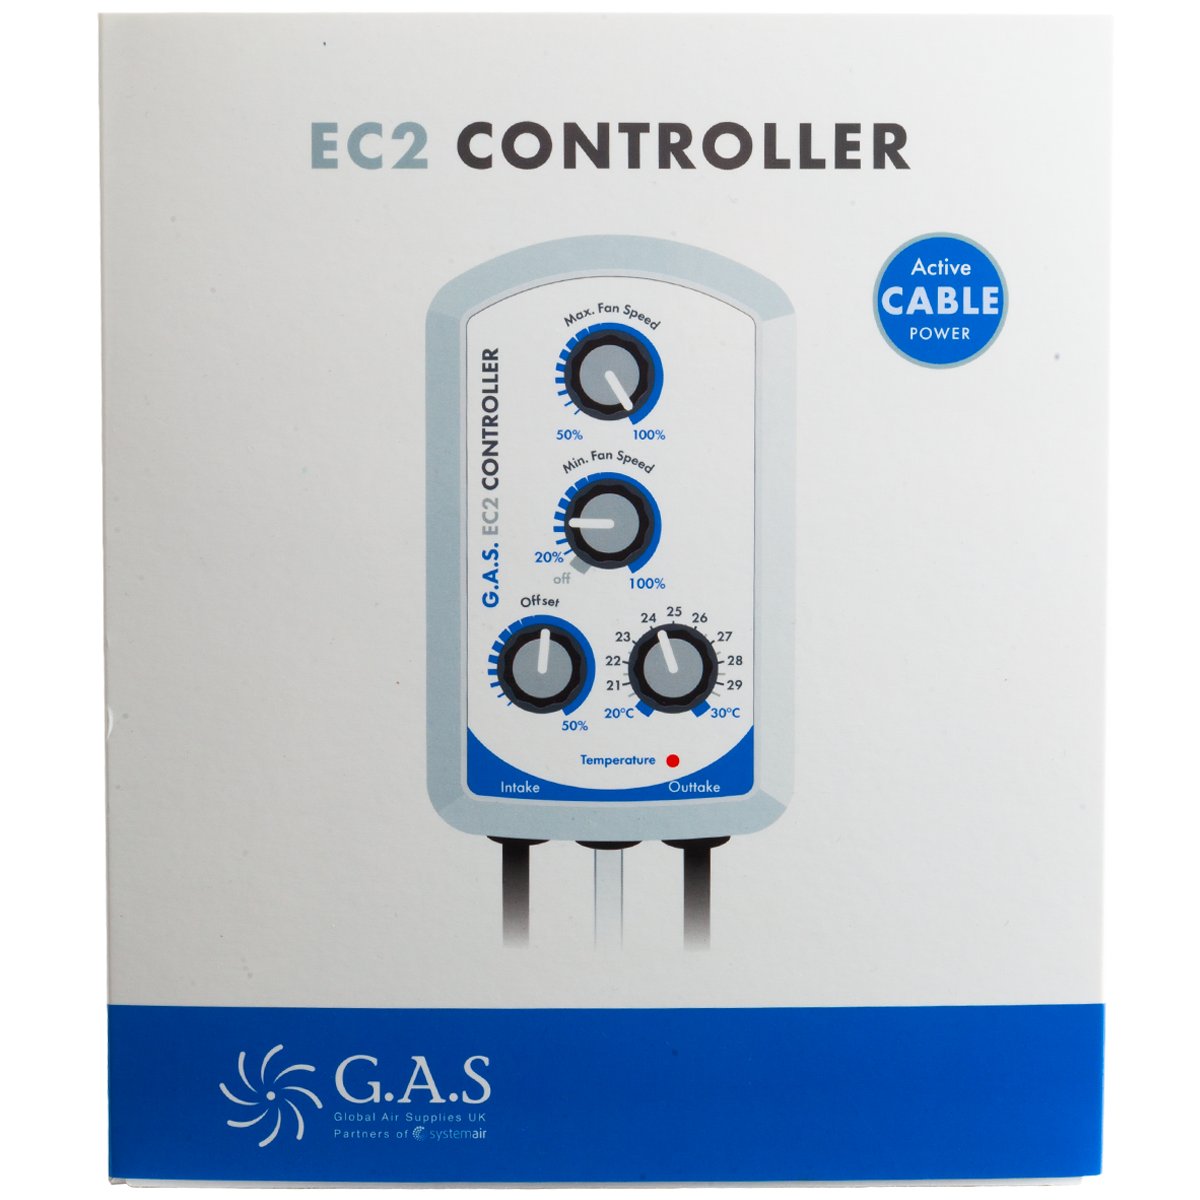 G.A.S - EC2 Thermostatic Fan Speed Controller with Balancer